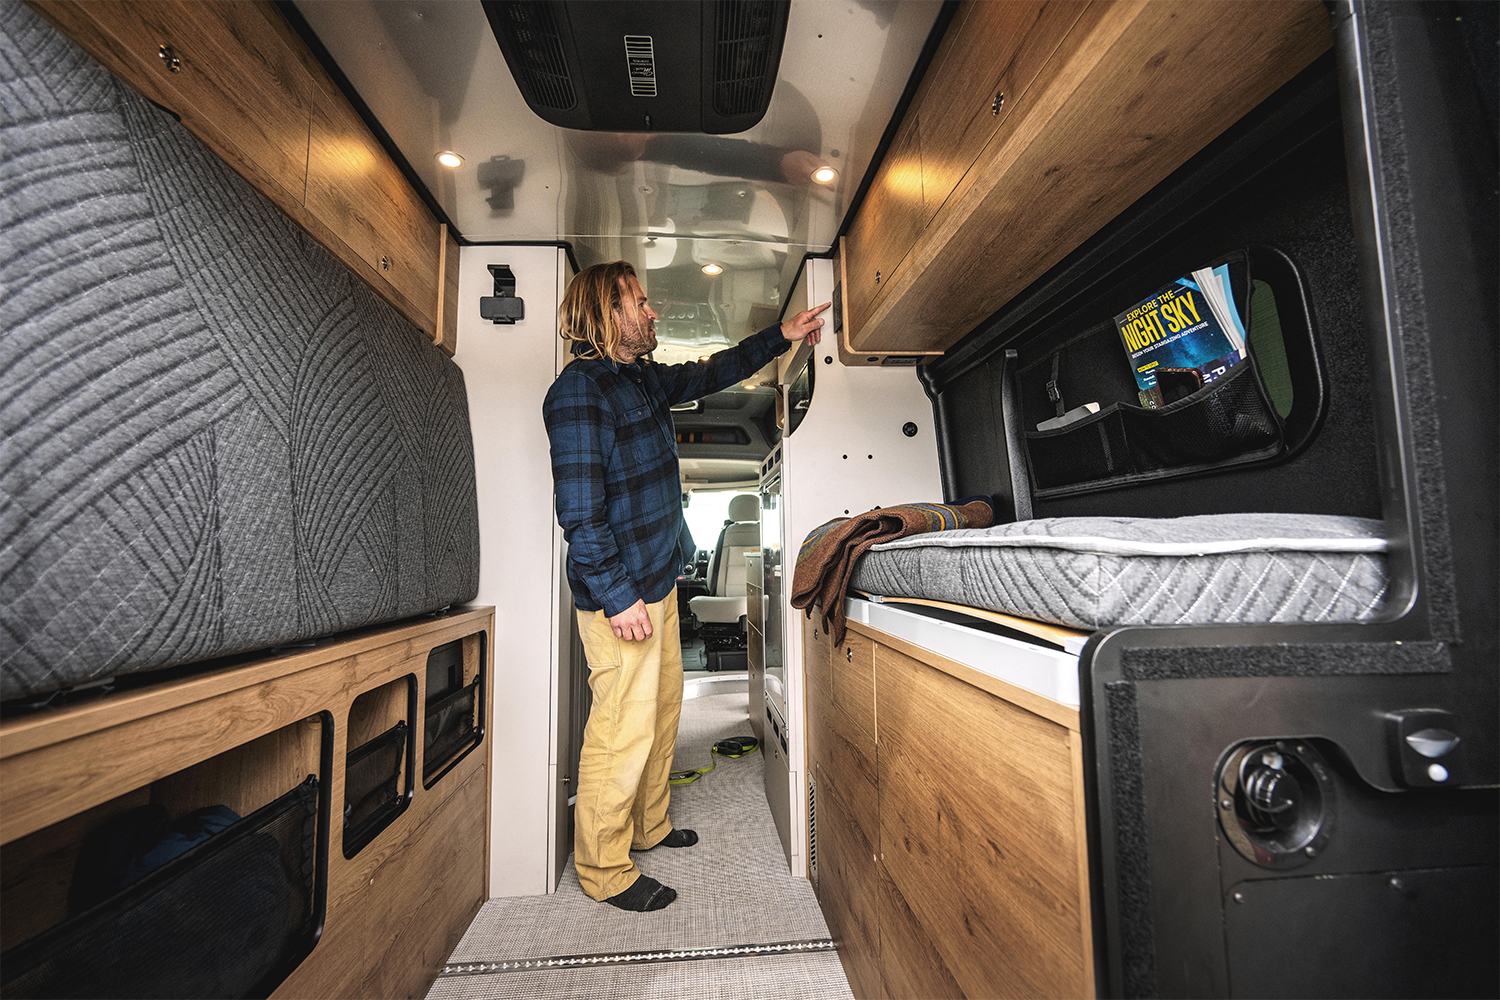 A man changes the settings inside his Airstream Rangeline motorhome